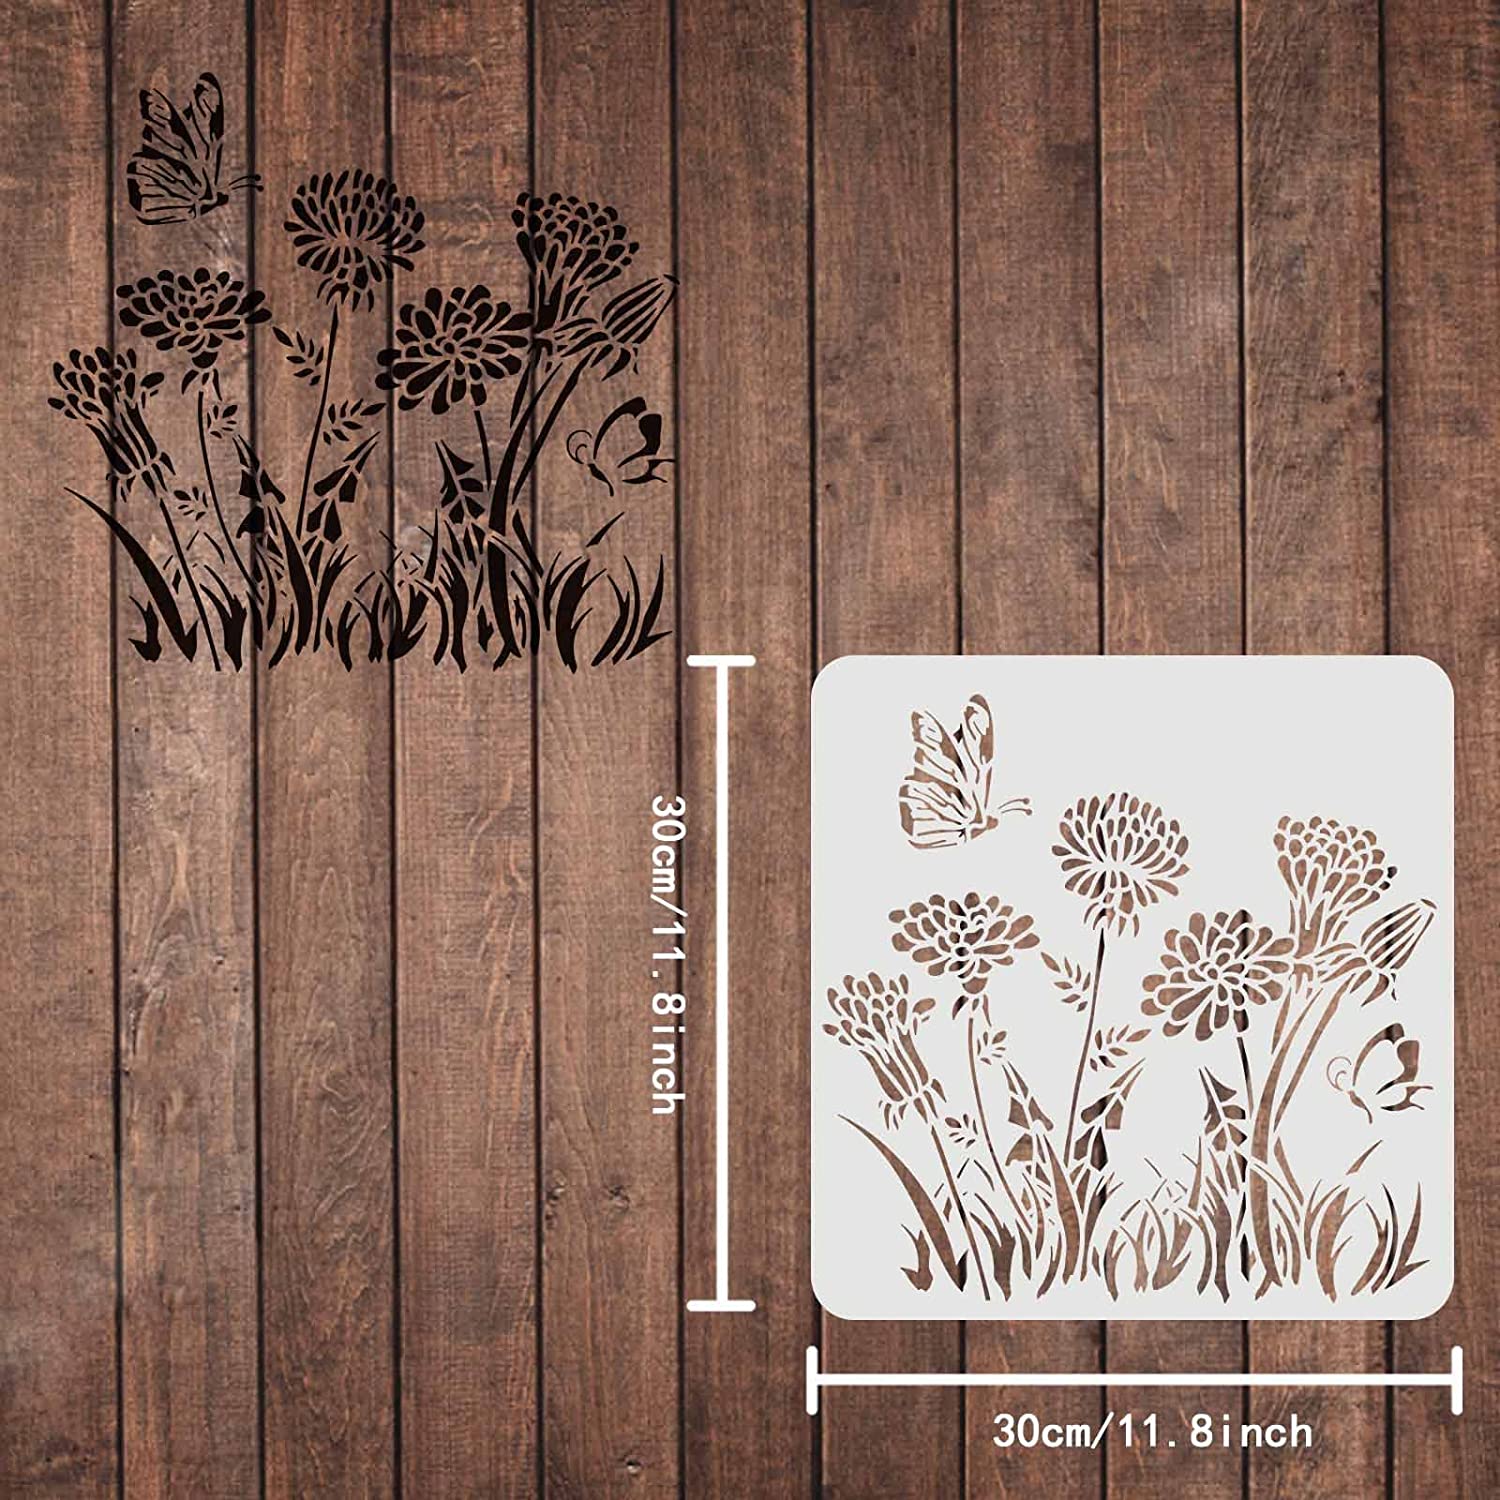 Dandelion Flower Drawing Painting Stencils Templates (11.8x11.8inch) Plastic Dandelion Stencils Decoration Square Dandelion Stencils for Painting on Wood, Floor, Wall and Fabric